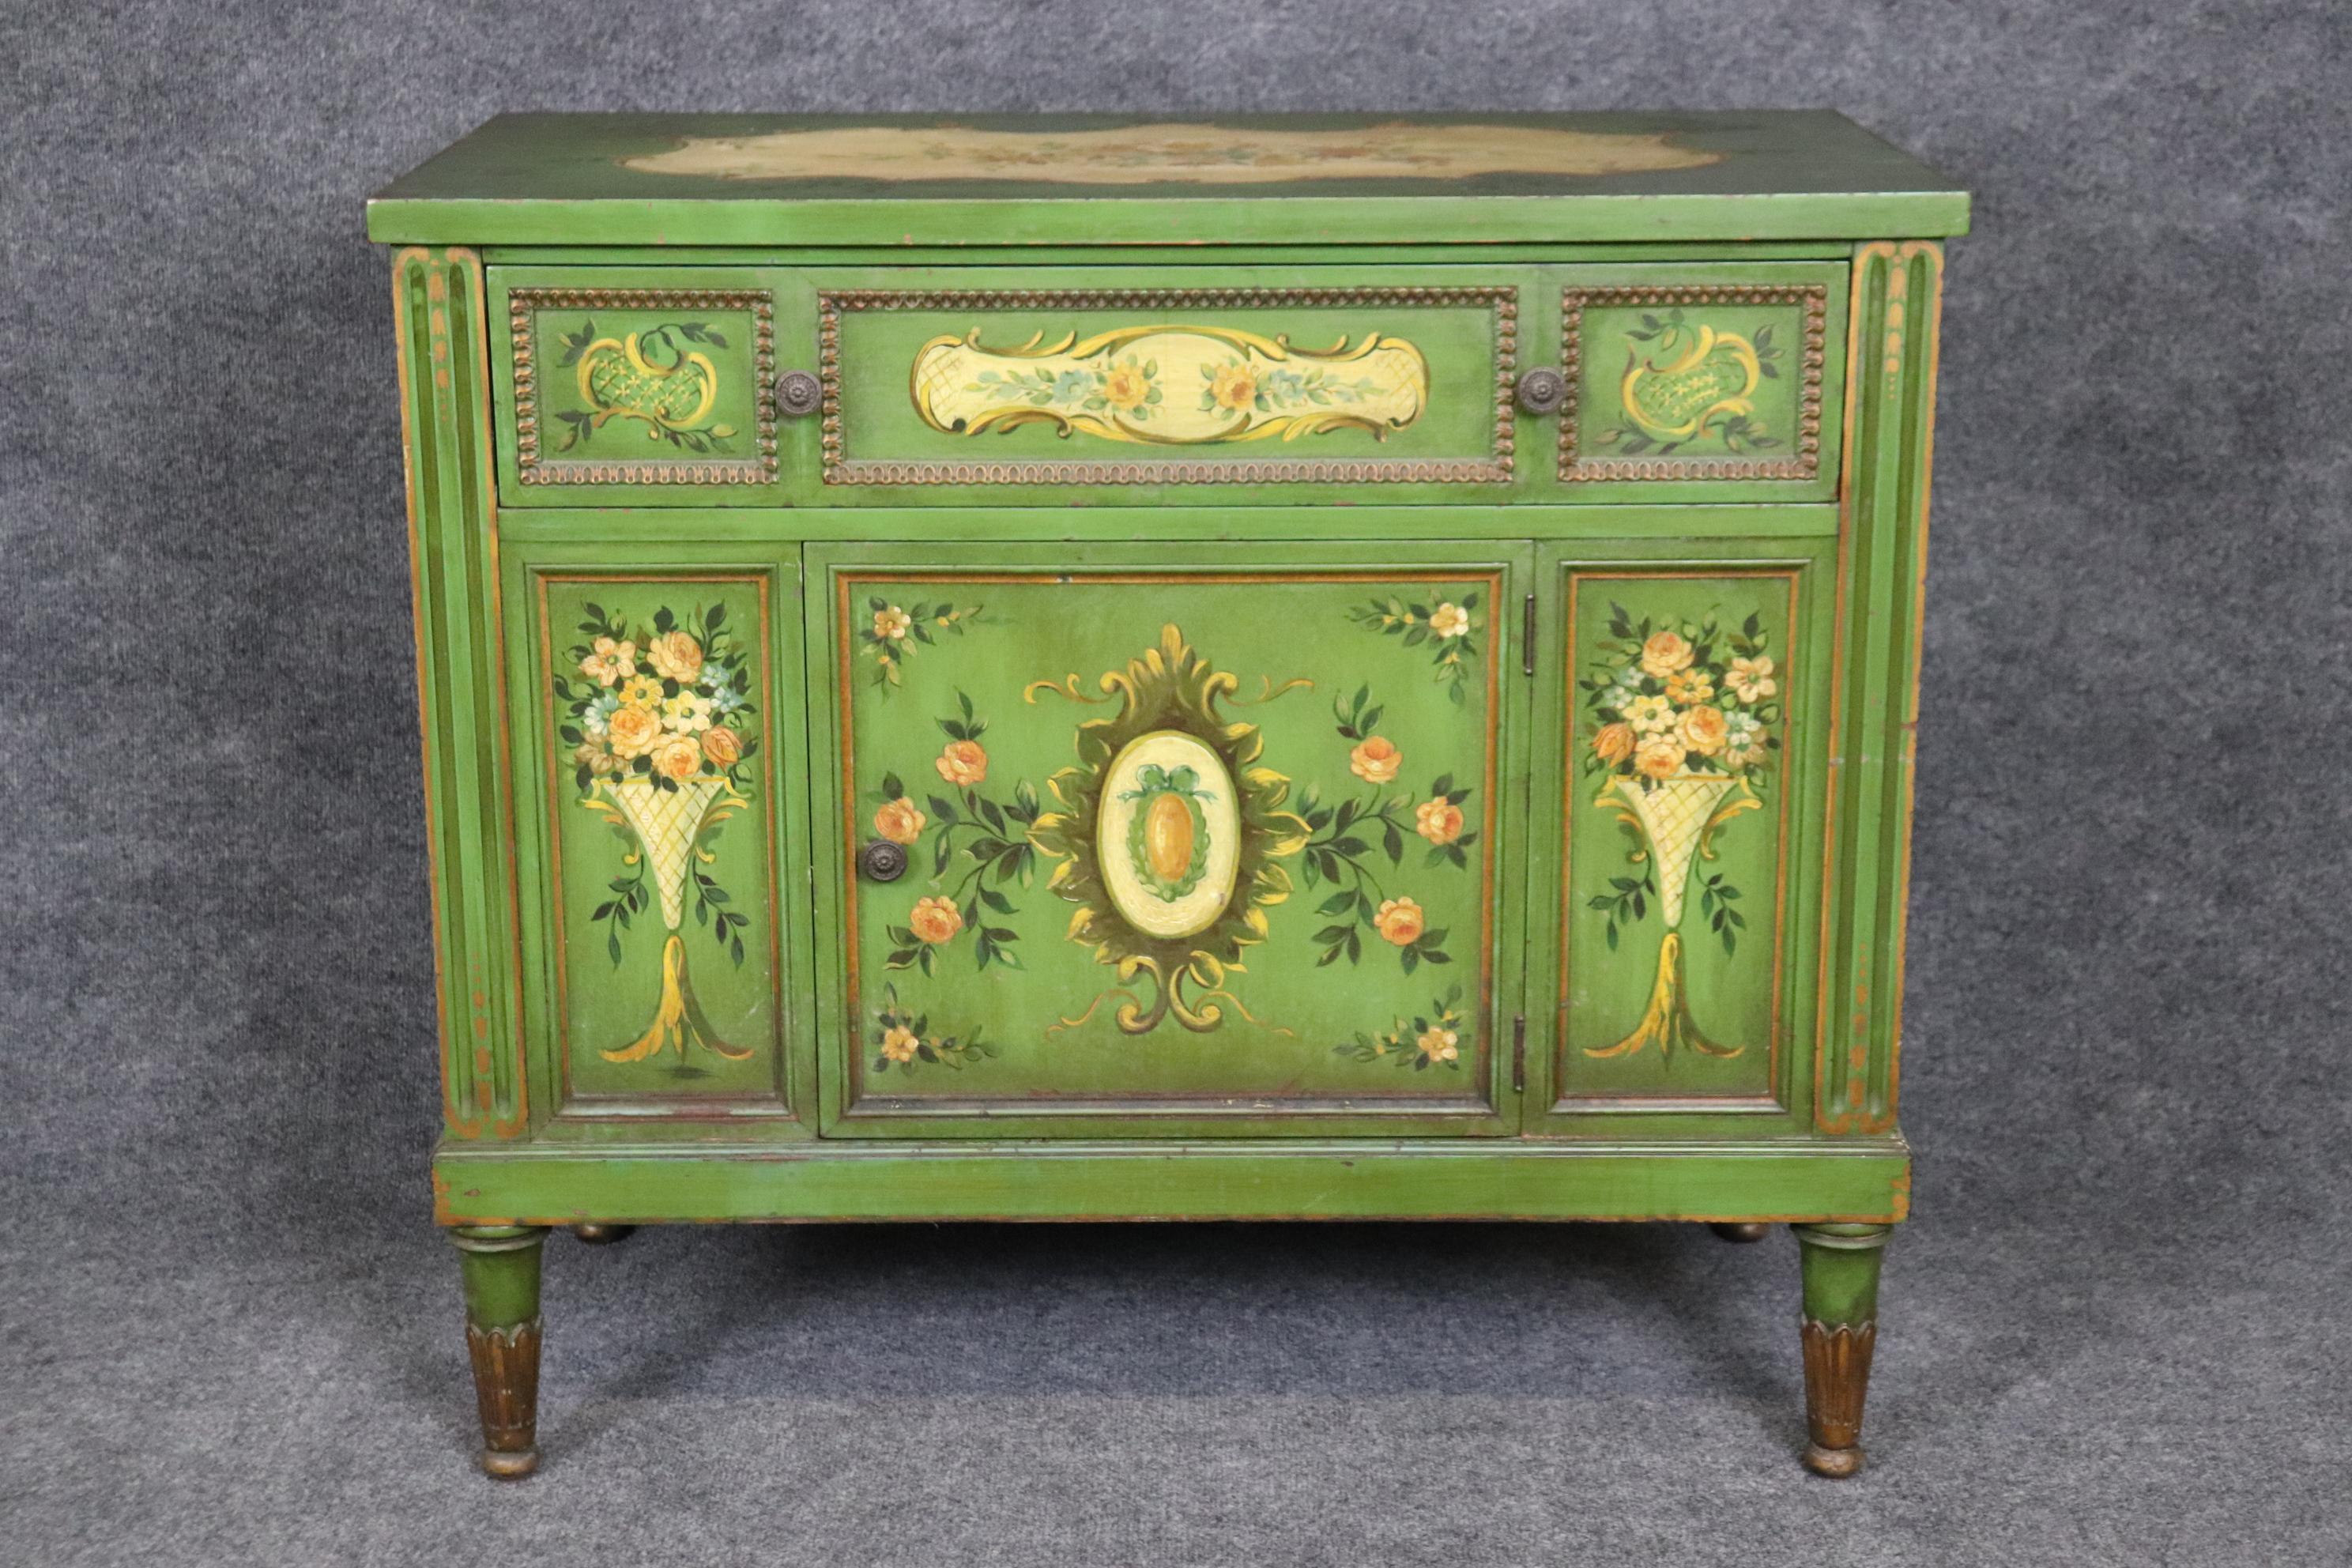 Dimensions: Height: 32 1/4in Width: 36in Depth: 18in

This vintage Venetian style green paint decorated commode/cabinet is made of the highest quality and is done very nicely! If you look at the photos provided, you will see the intricate detail in